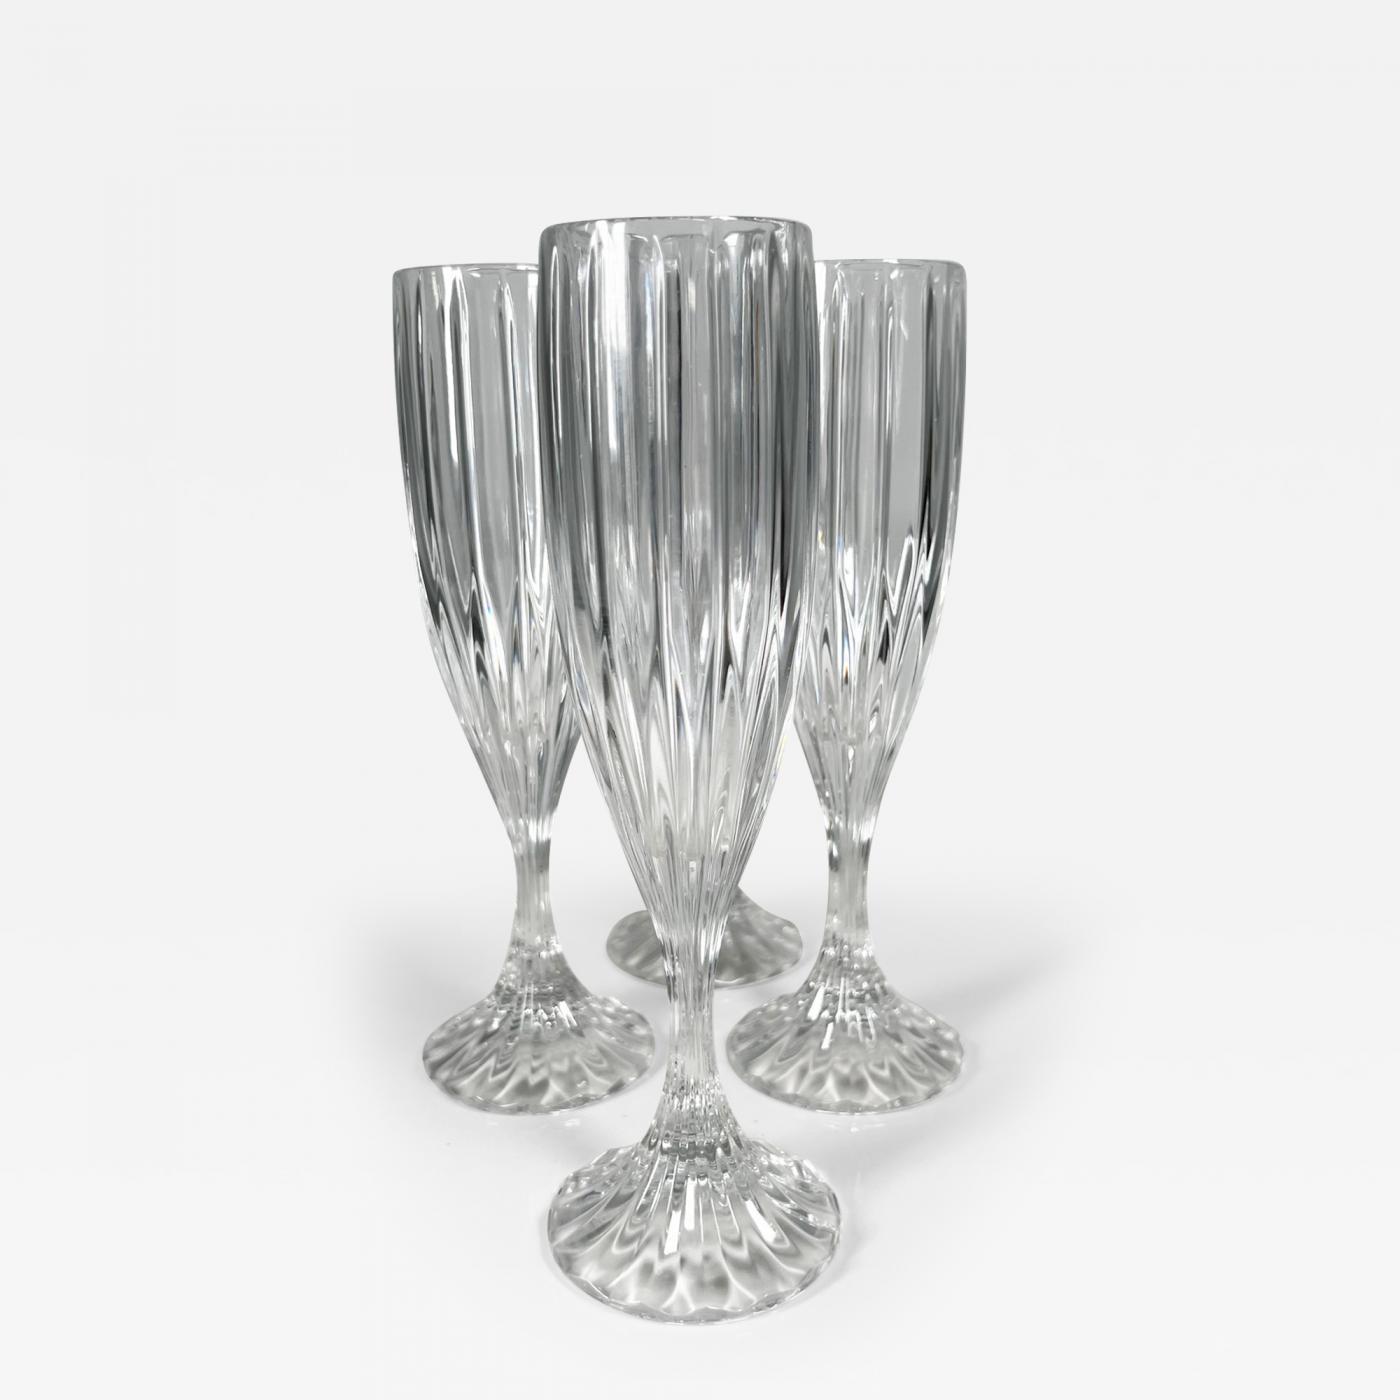 https://cdn.incollect.com/sites/default/files/zoom/1990s-MIKASA-Set-of-Four-Park-Lane-Champagne-Fluted-Crystal-Glasses-632306-3033852.jpg